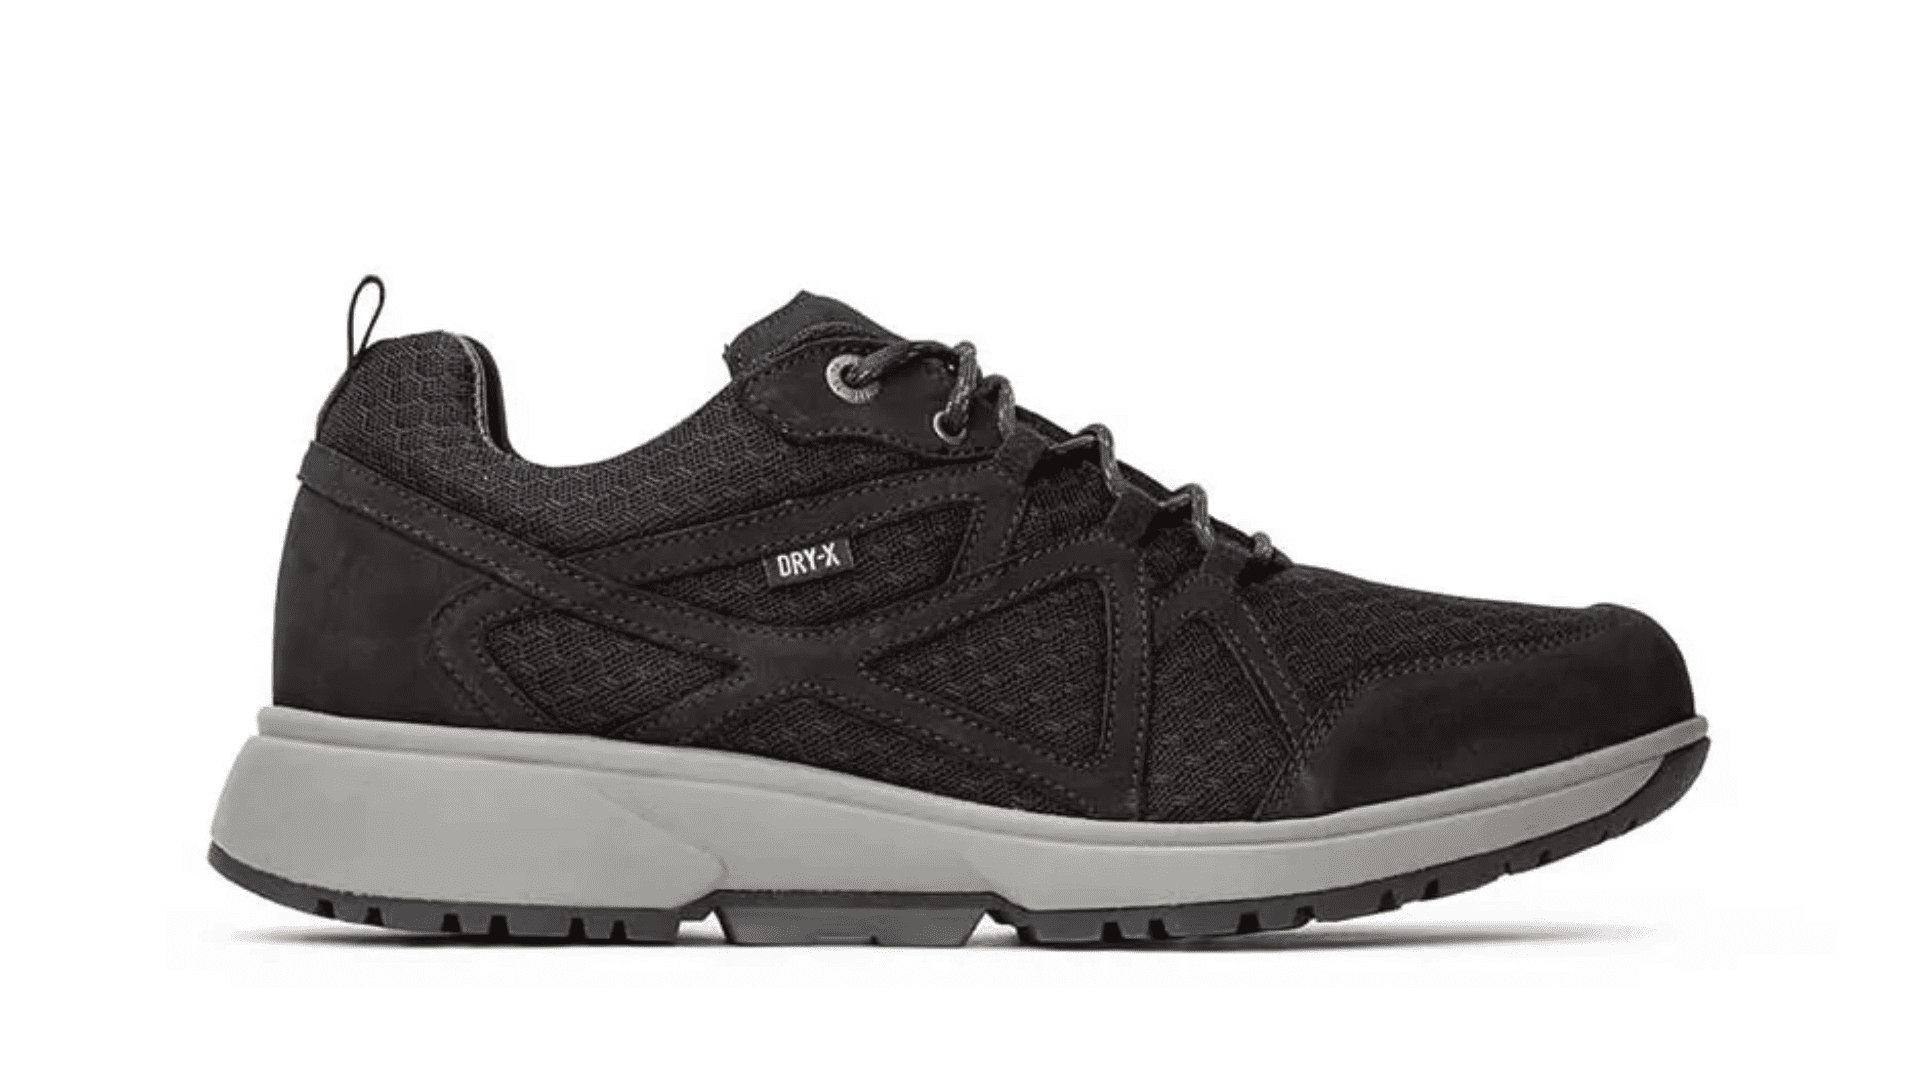 This Xsensible Abo in Black, is a men’s hiking shoe made with a blend of high quality, elastic, high-tech material that guarantees a comfortable fit.